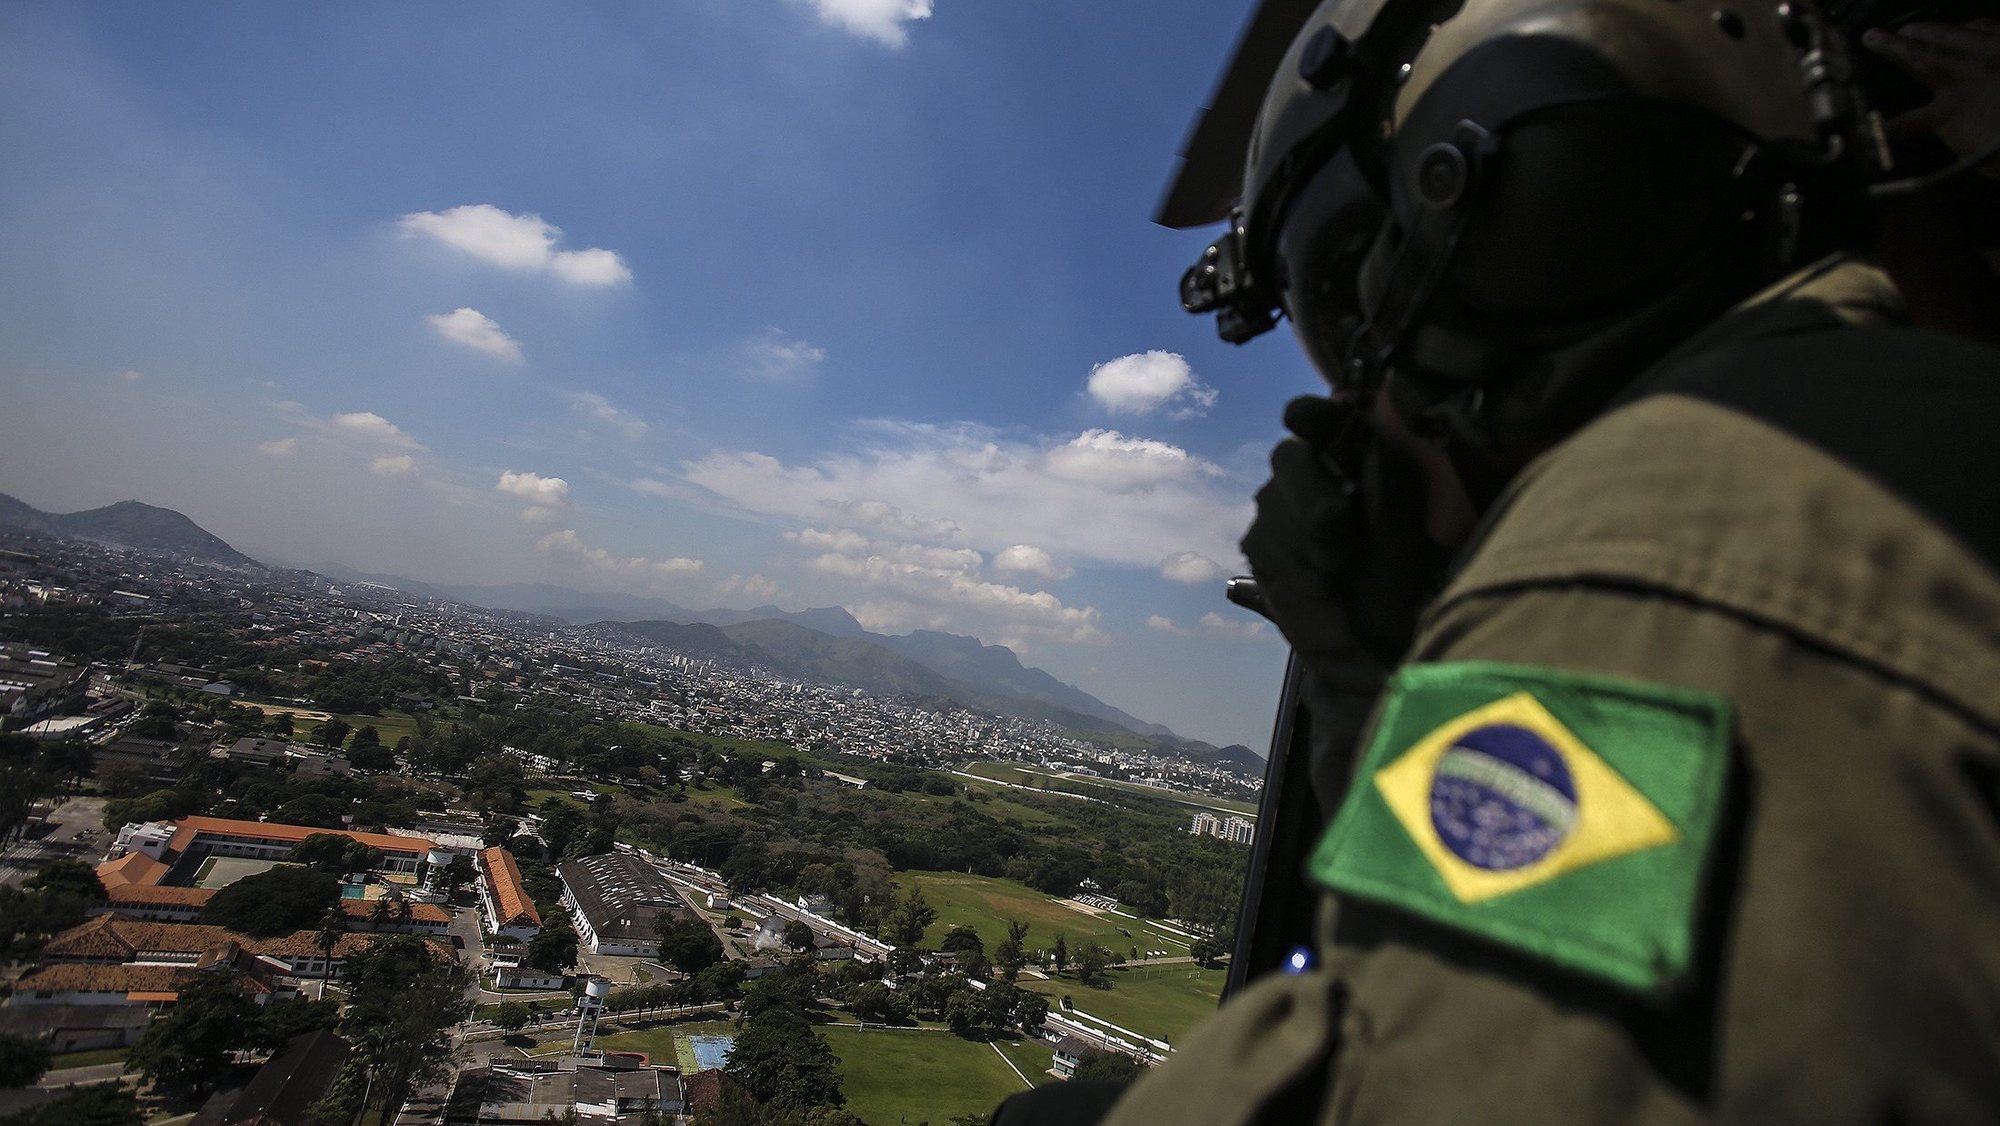 epa05246706 Brazilian Air Force soldiers fly over the neighborhood of Deodoro, venue for several Olympic events, as part of the operation &#039;Pao de Acucar&#039; (&#039;Sugar Loaf&#039;) security preparations for the 2016 Rio Olympics, in Rio de Janeiro, Brazil, 06 April 2016.  EPA/Antonio Lacerda